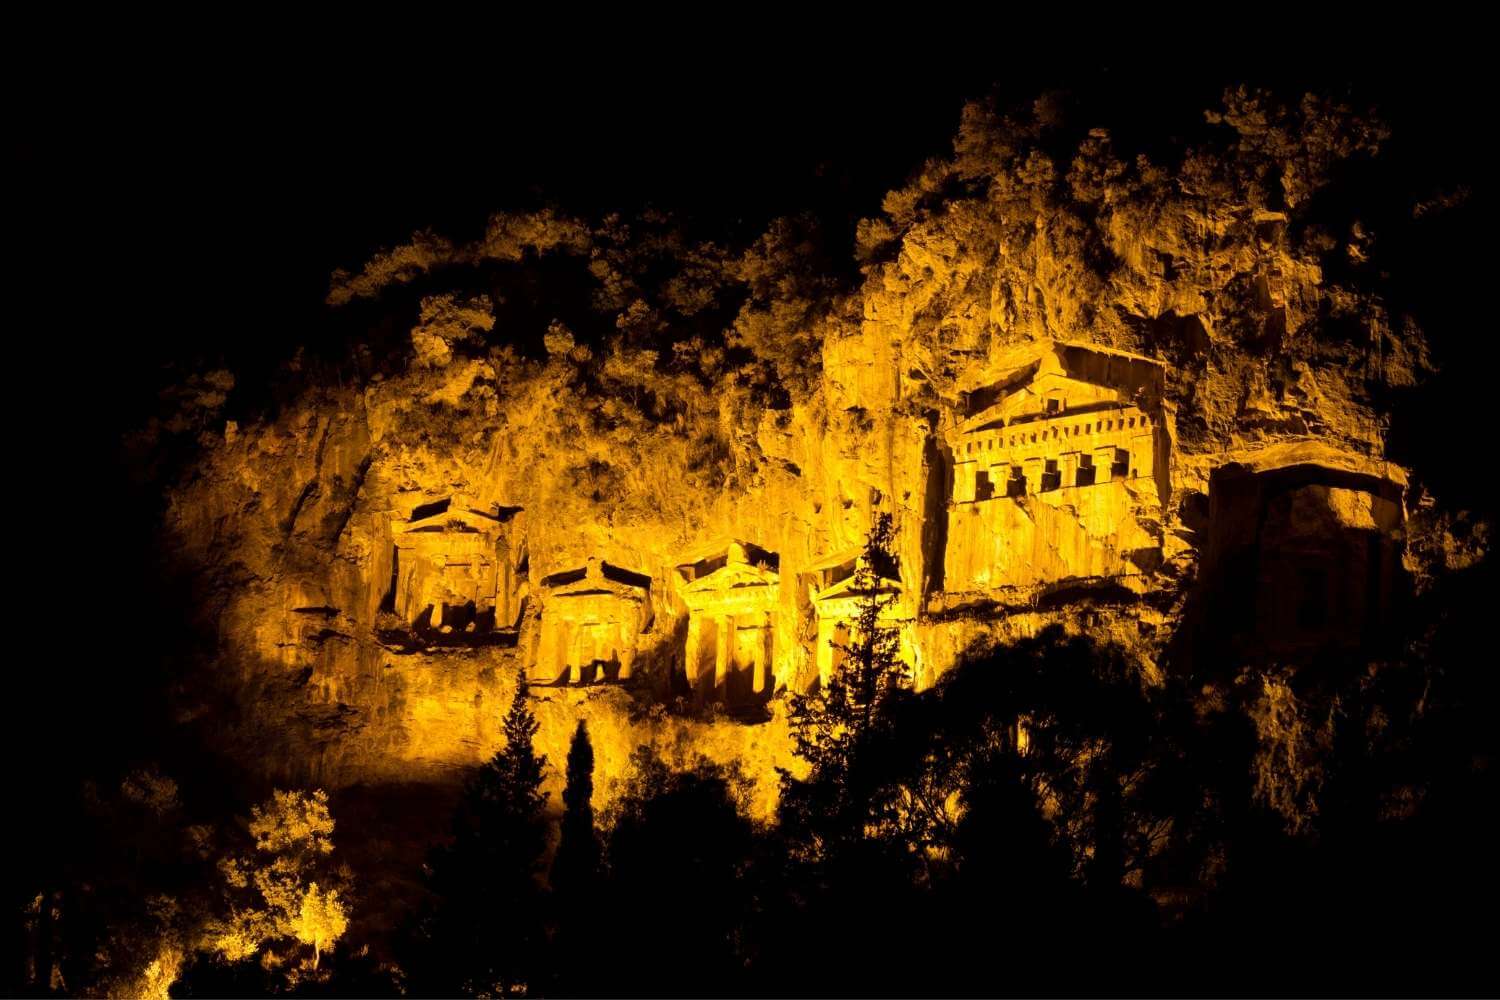 Rock Tombs of Dalyan in the evening to be seen during the moonlight trip